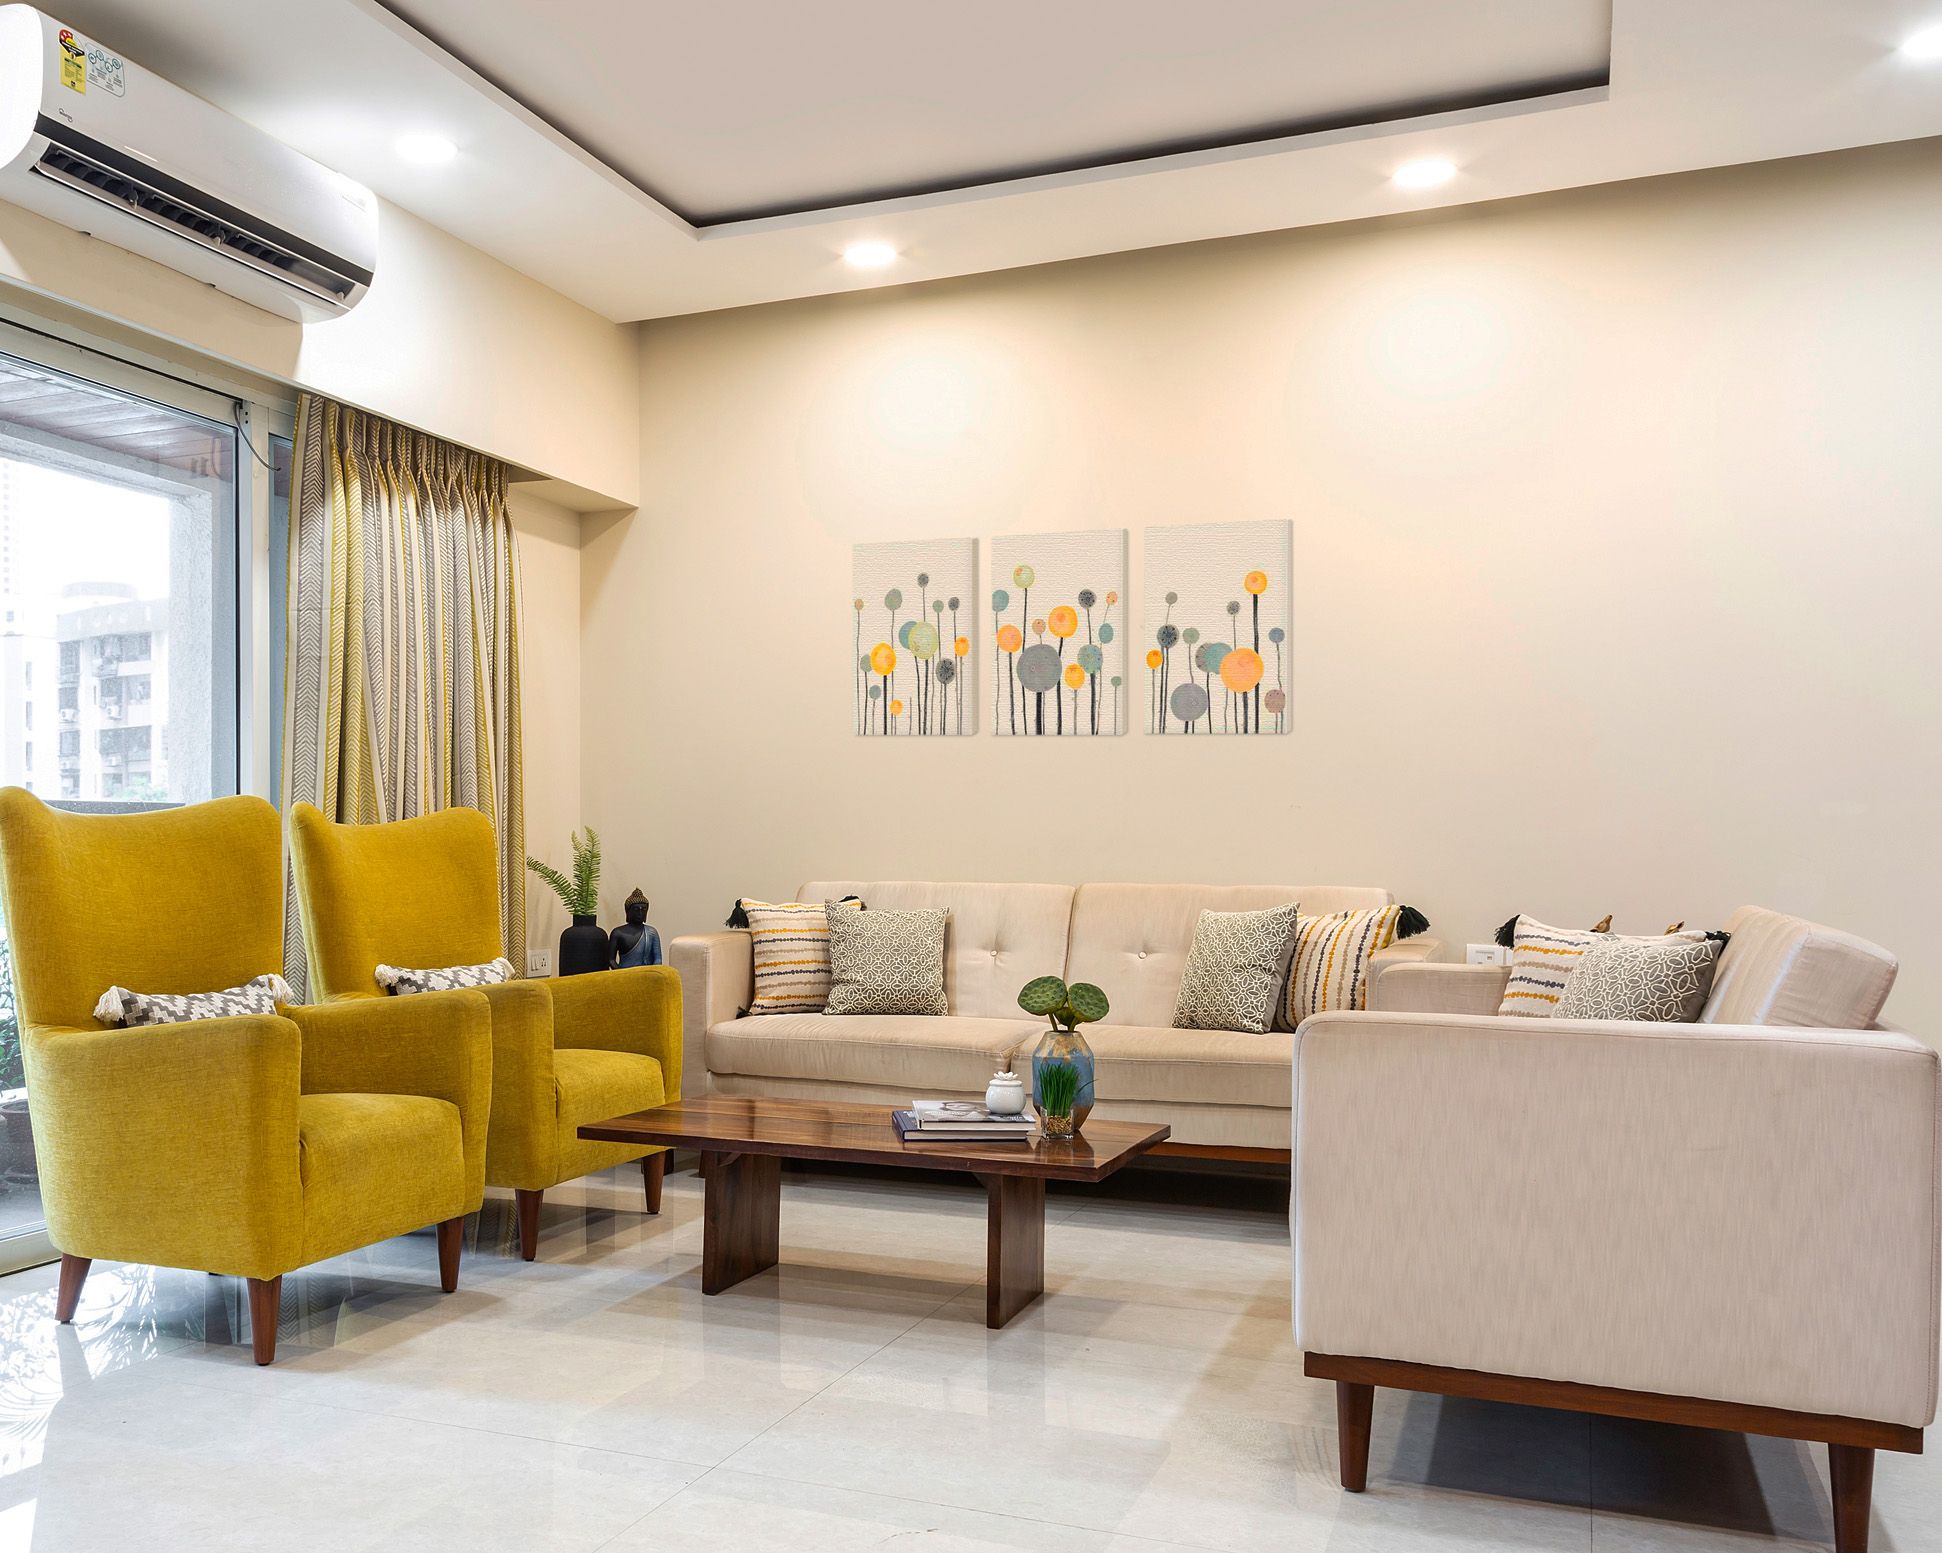 Contemporary Living Room Design WIth Beige Sofa And Yellow Accent Chairs